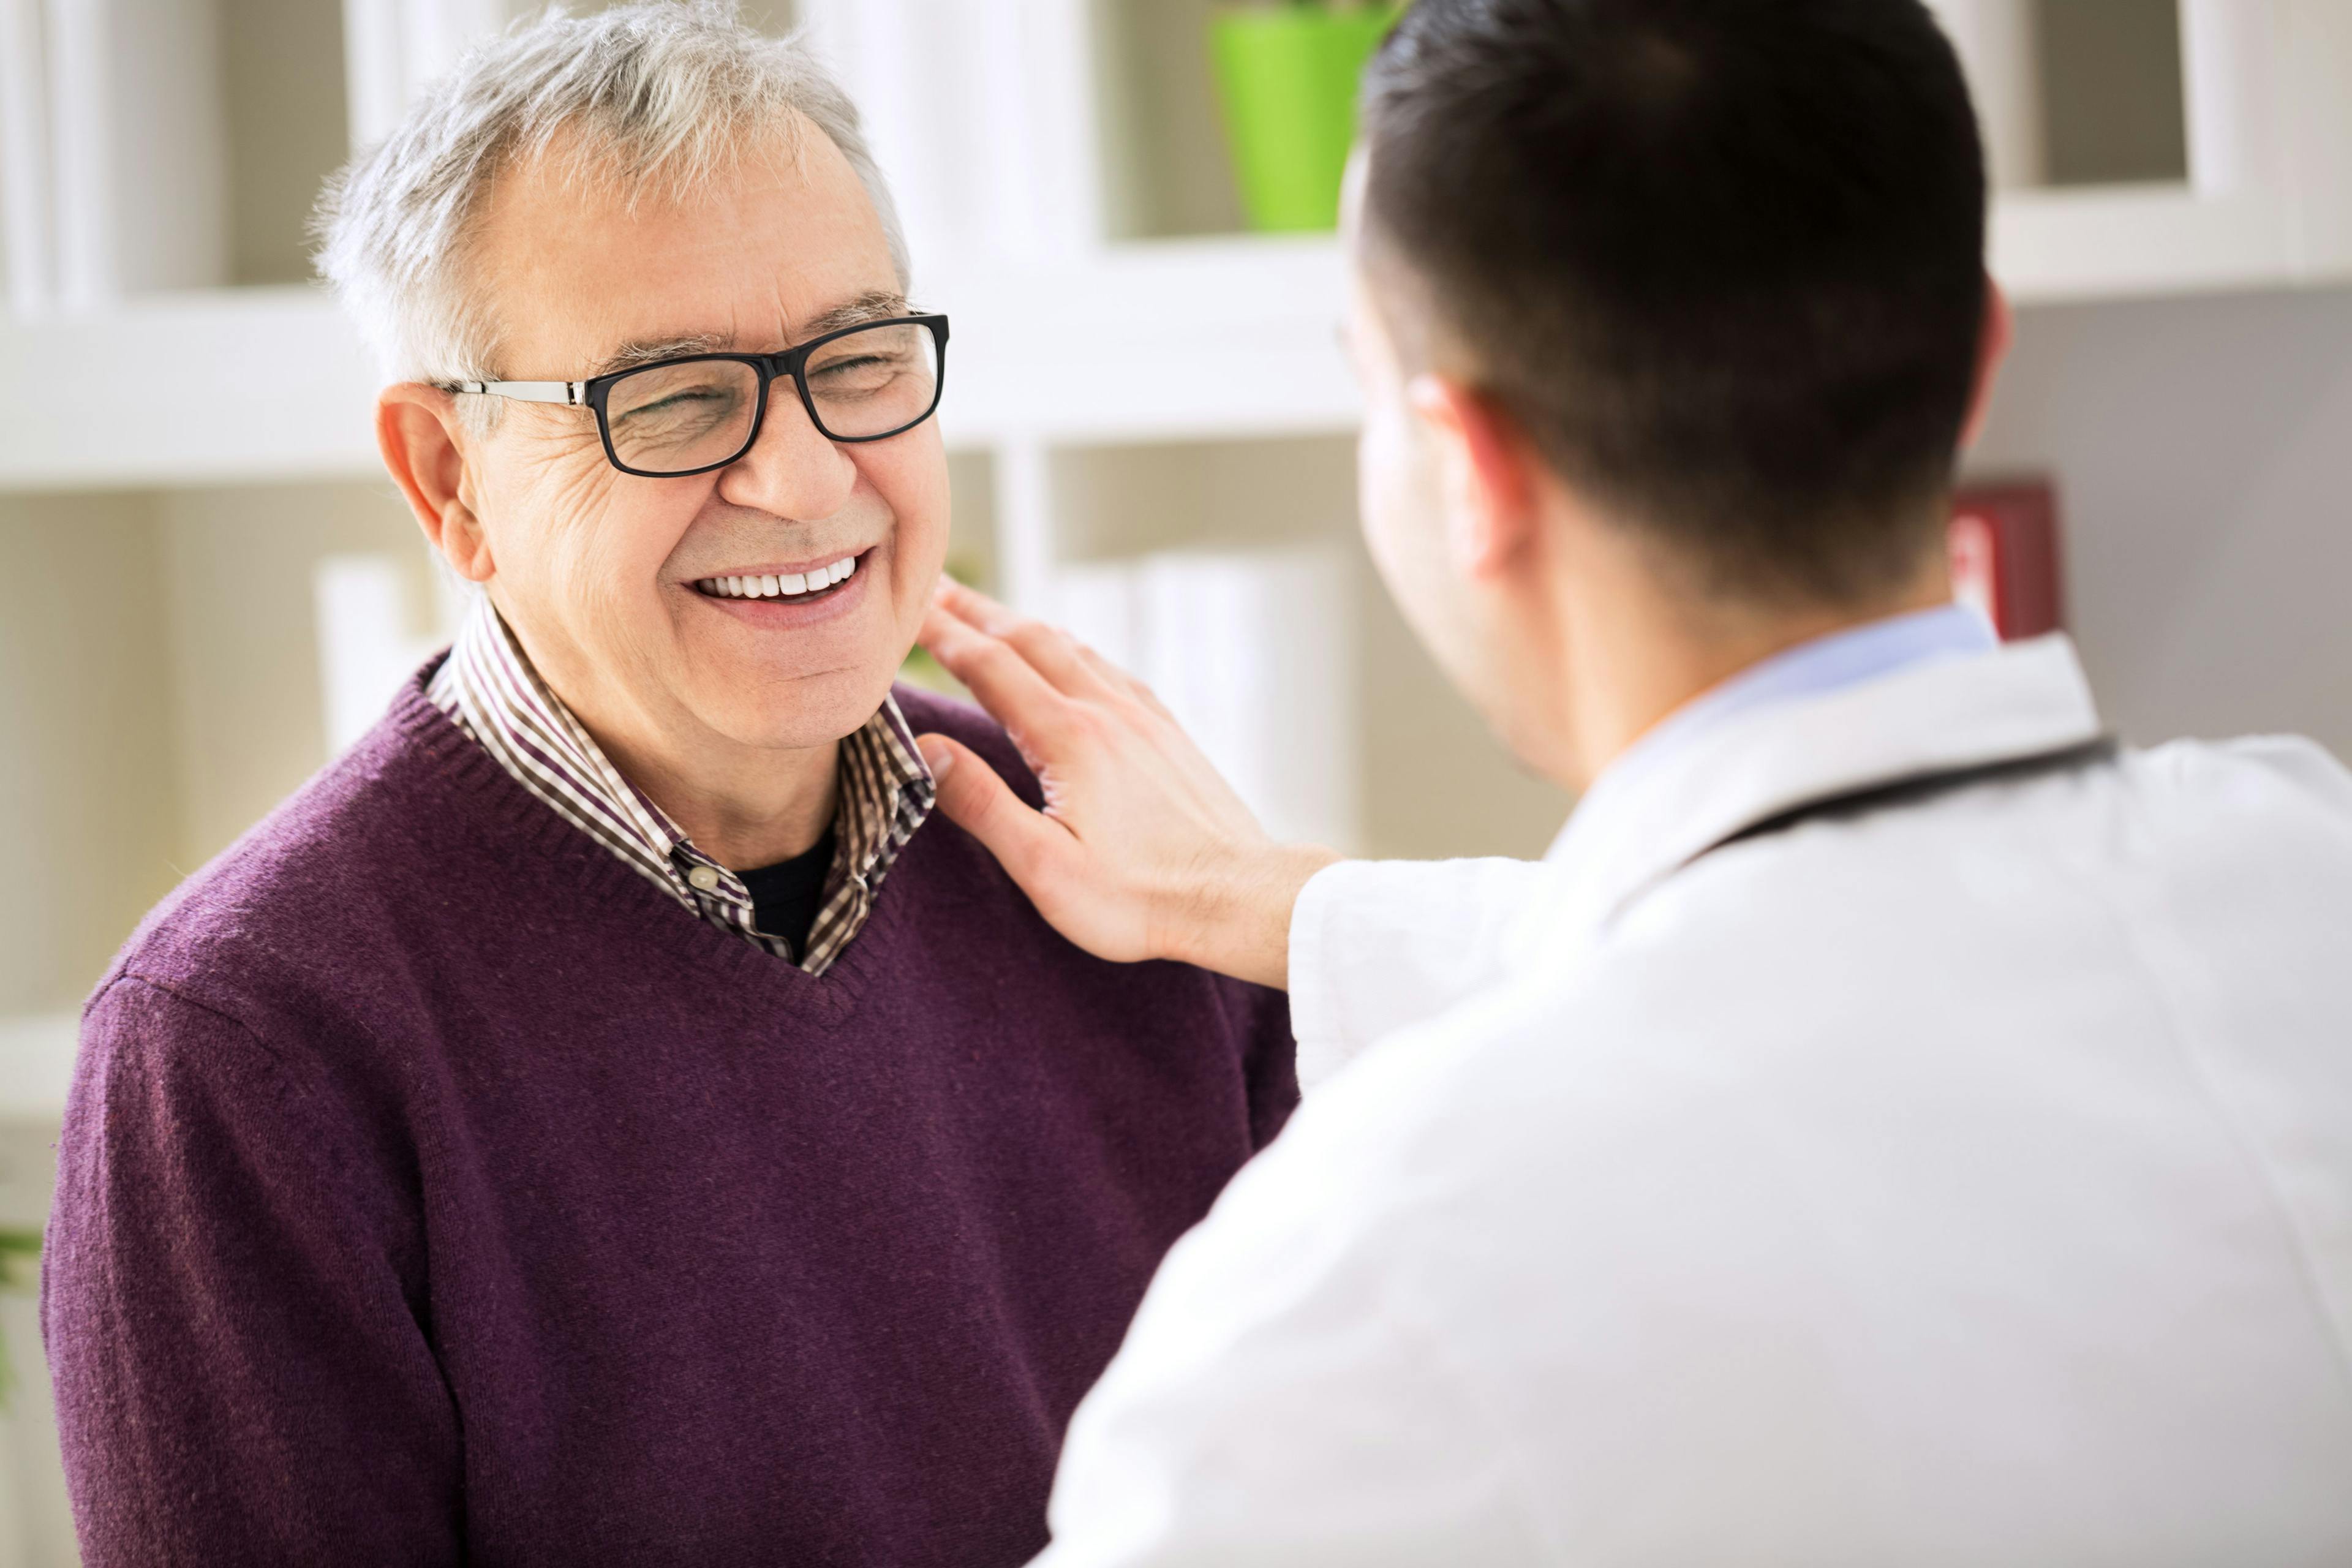 Doctor and patient having a discussion about arthritis management. | Credit: Fotolia